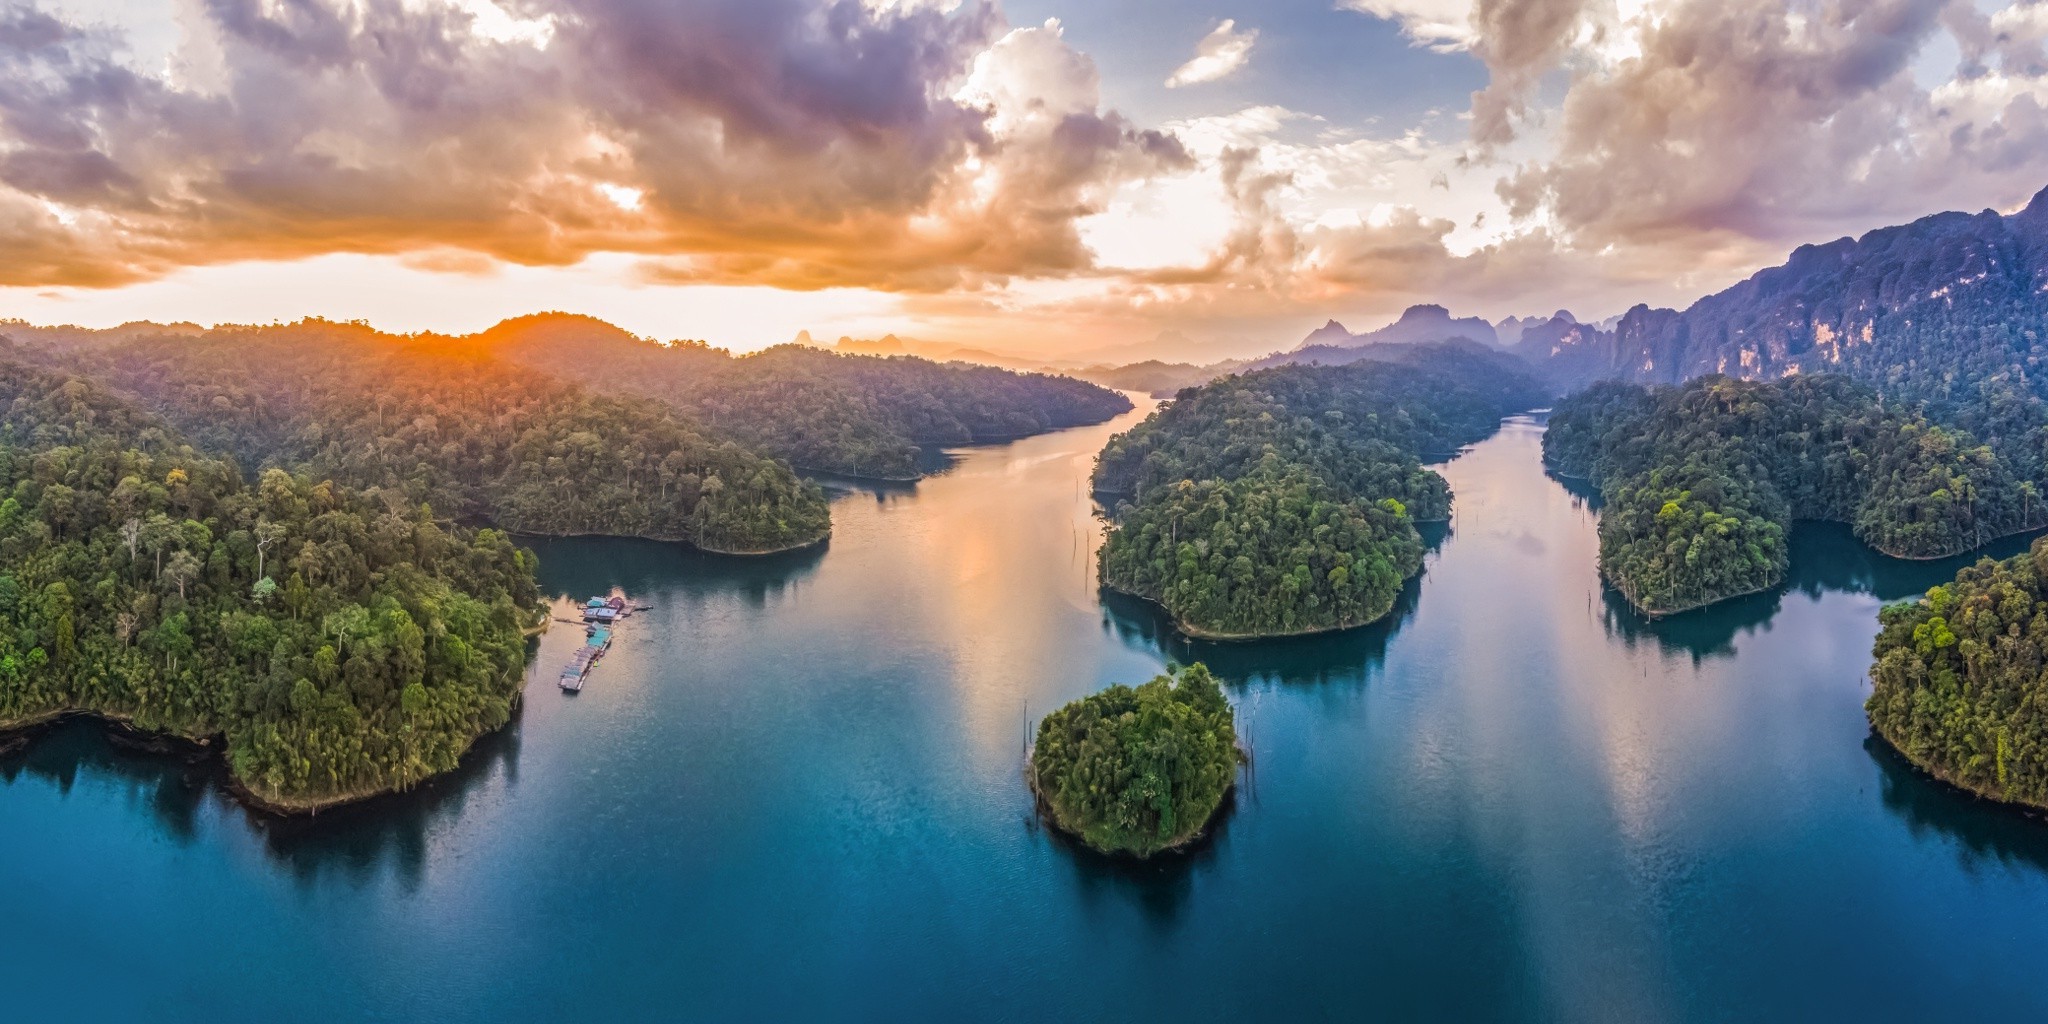 lake, Sunset, Thailand, Clouds, Island, Forest, Mountain, Water, Turquoise, Nature, Tropical, Landscape Wallpaper